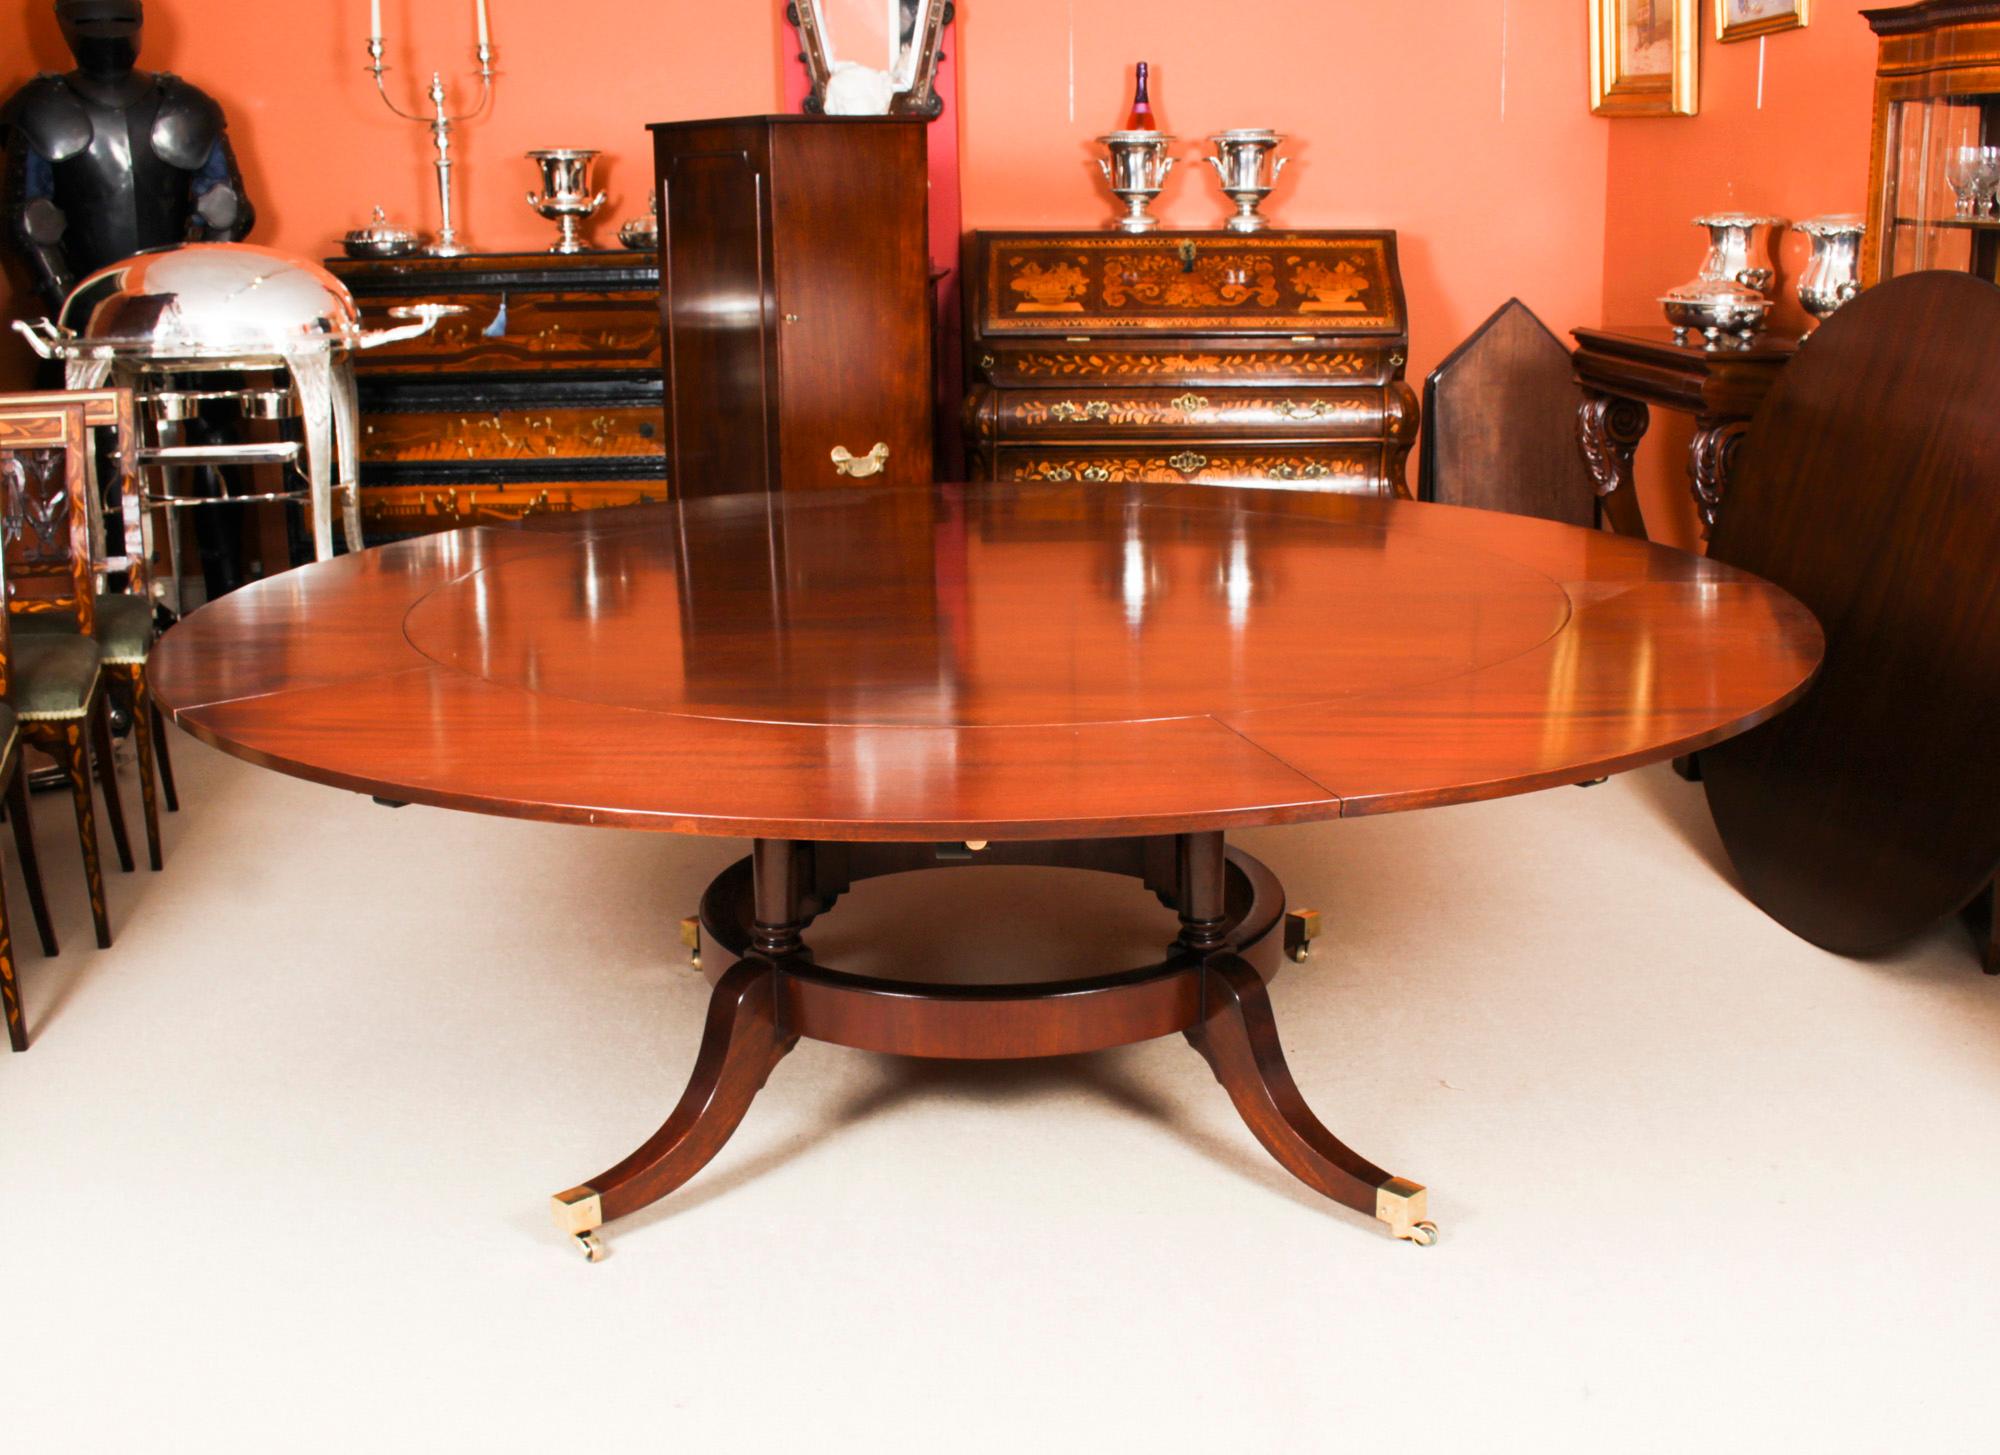 This beautiful dining set comprises a Regency Revival Jupe style dining set comprising a dining table, a leaf cabinet, a Lazy Susan and the matching set of ten Vintage Swag Back dining chairs, mid 20th Century in date.

The table has a solid